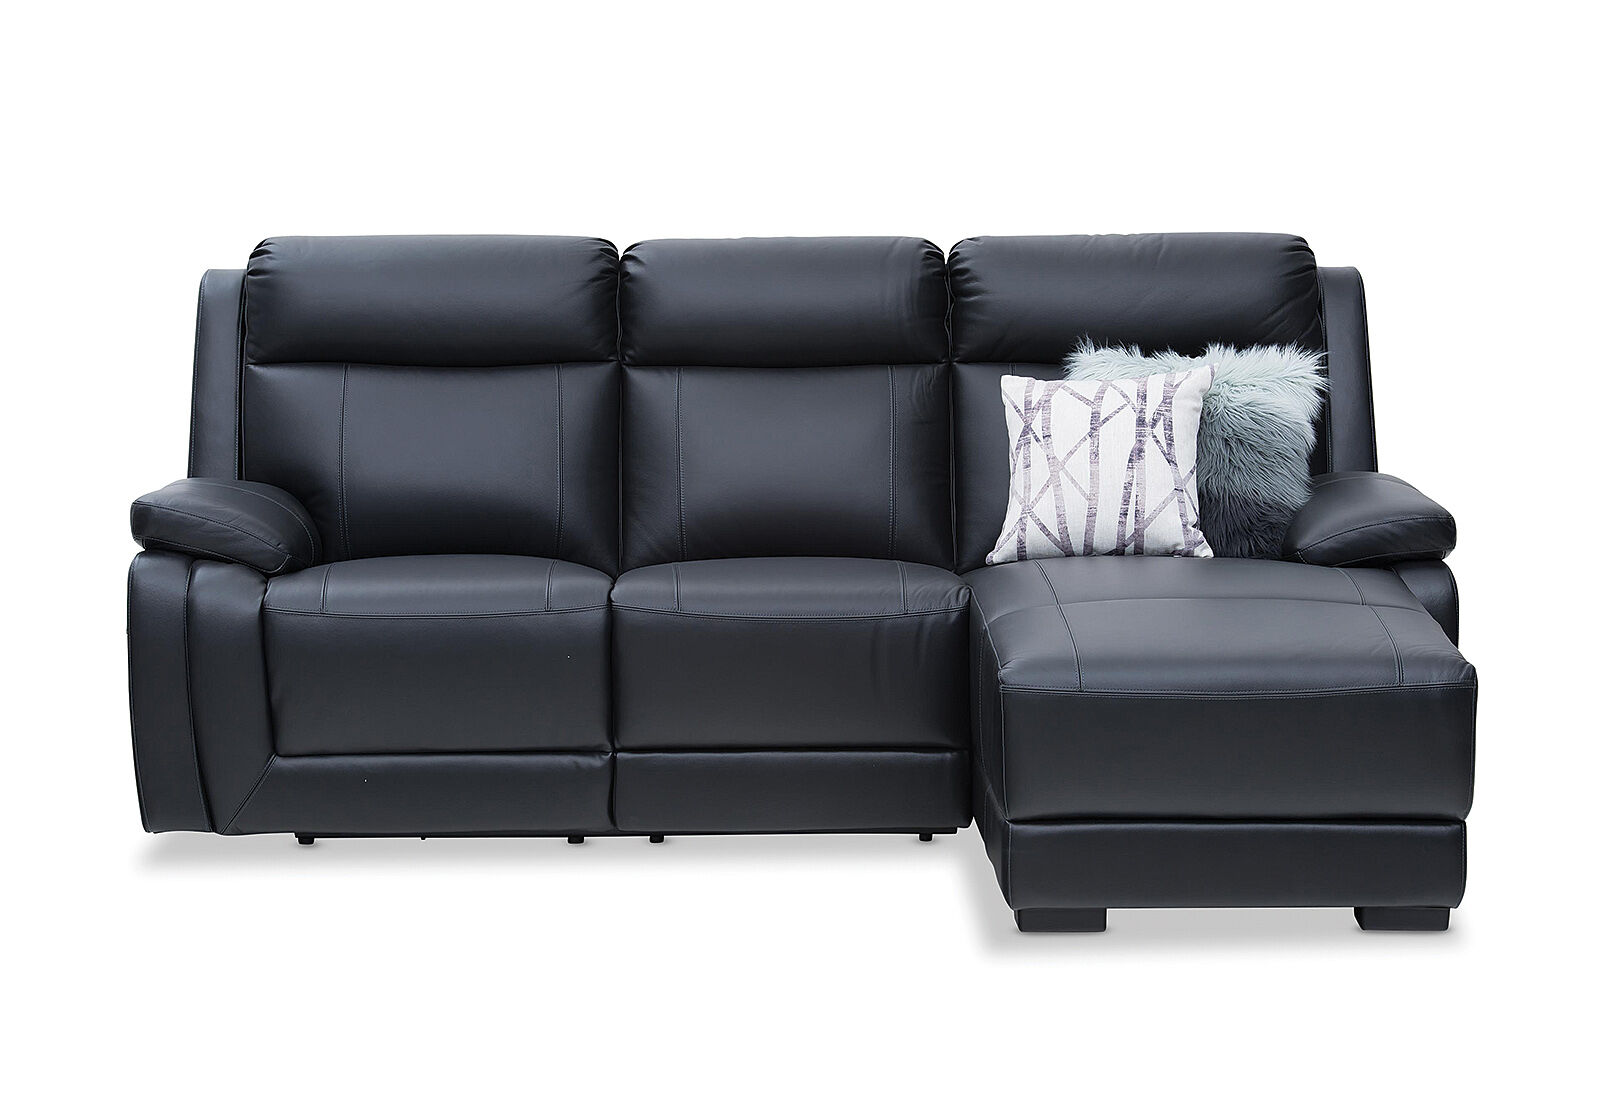 Black San Marco Leather 3 Seater Chaise, Leather Lounge Chaise